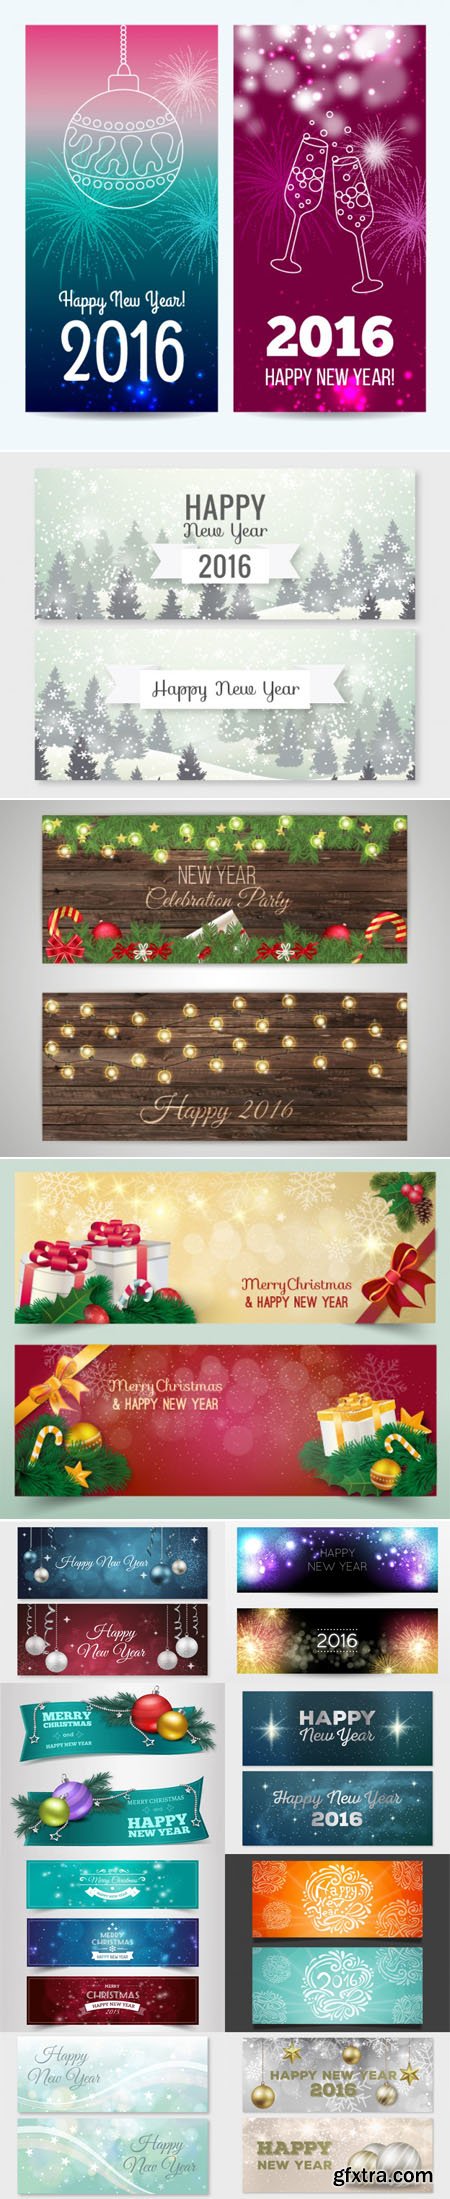 Happy New Year 2016 Banners in Vector [Vol.3]